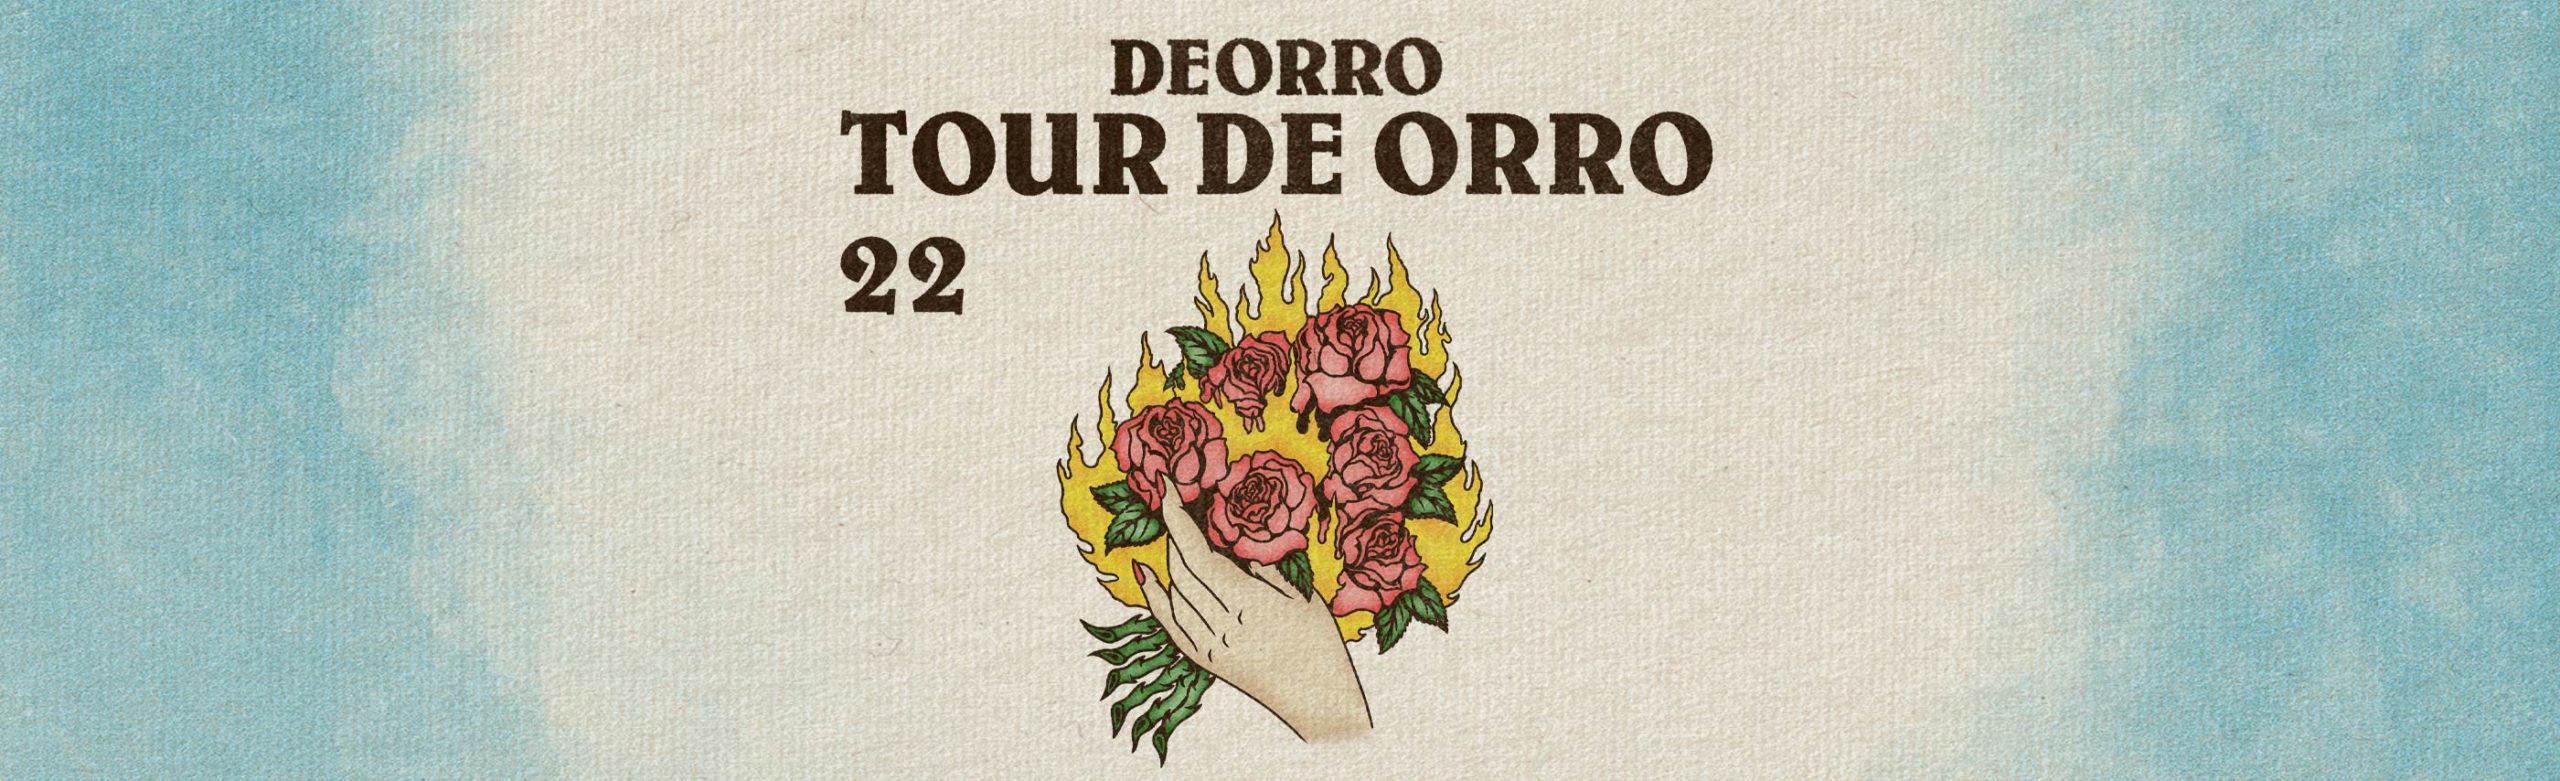 Deorro Confirms Shows in Bozeman and Missoula Image